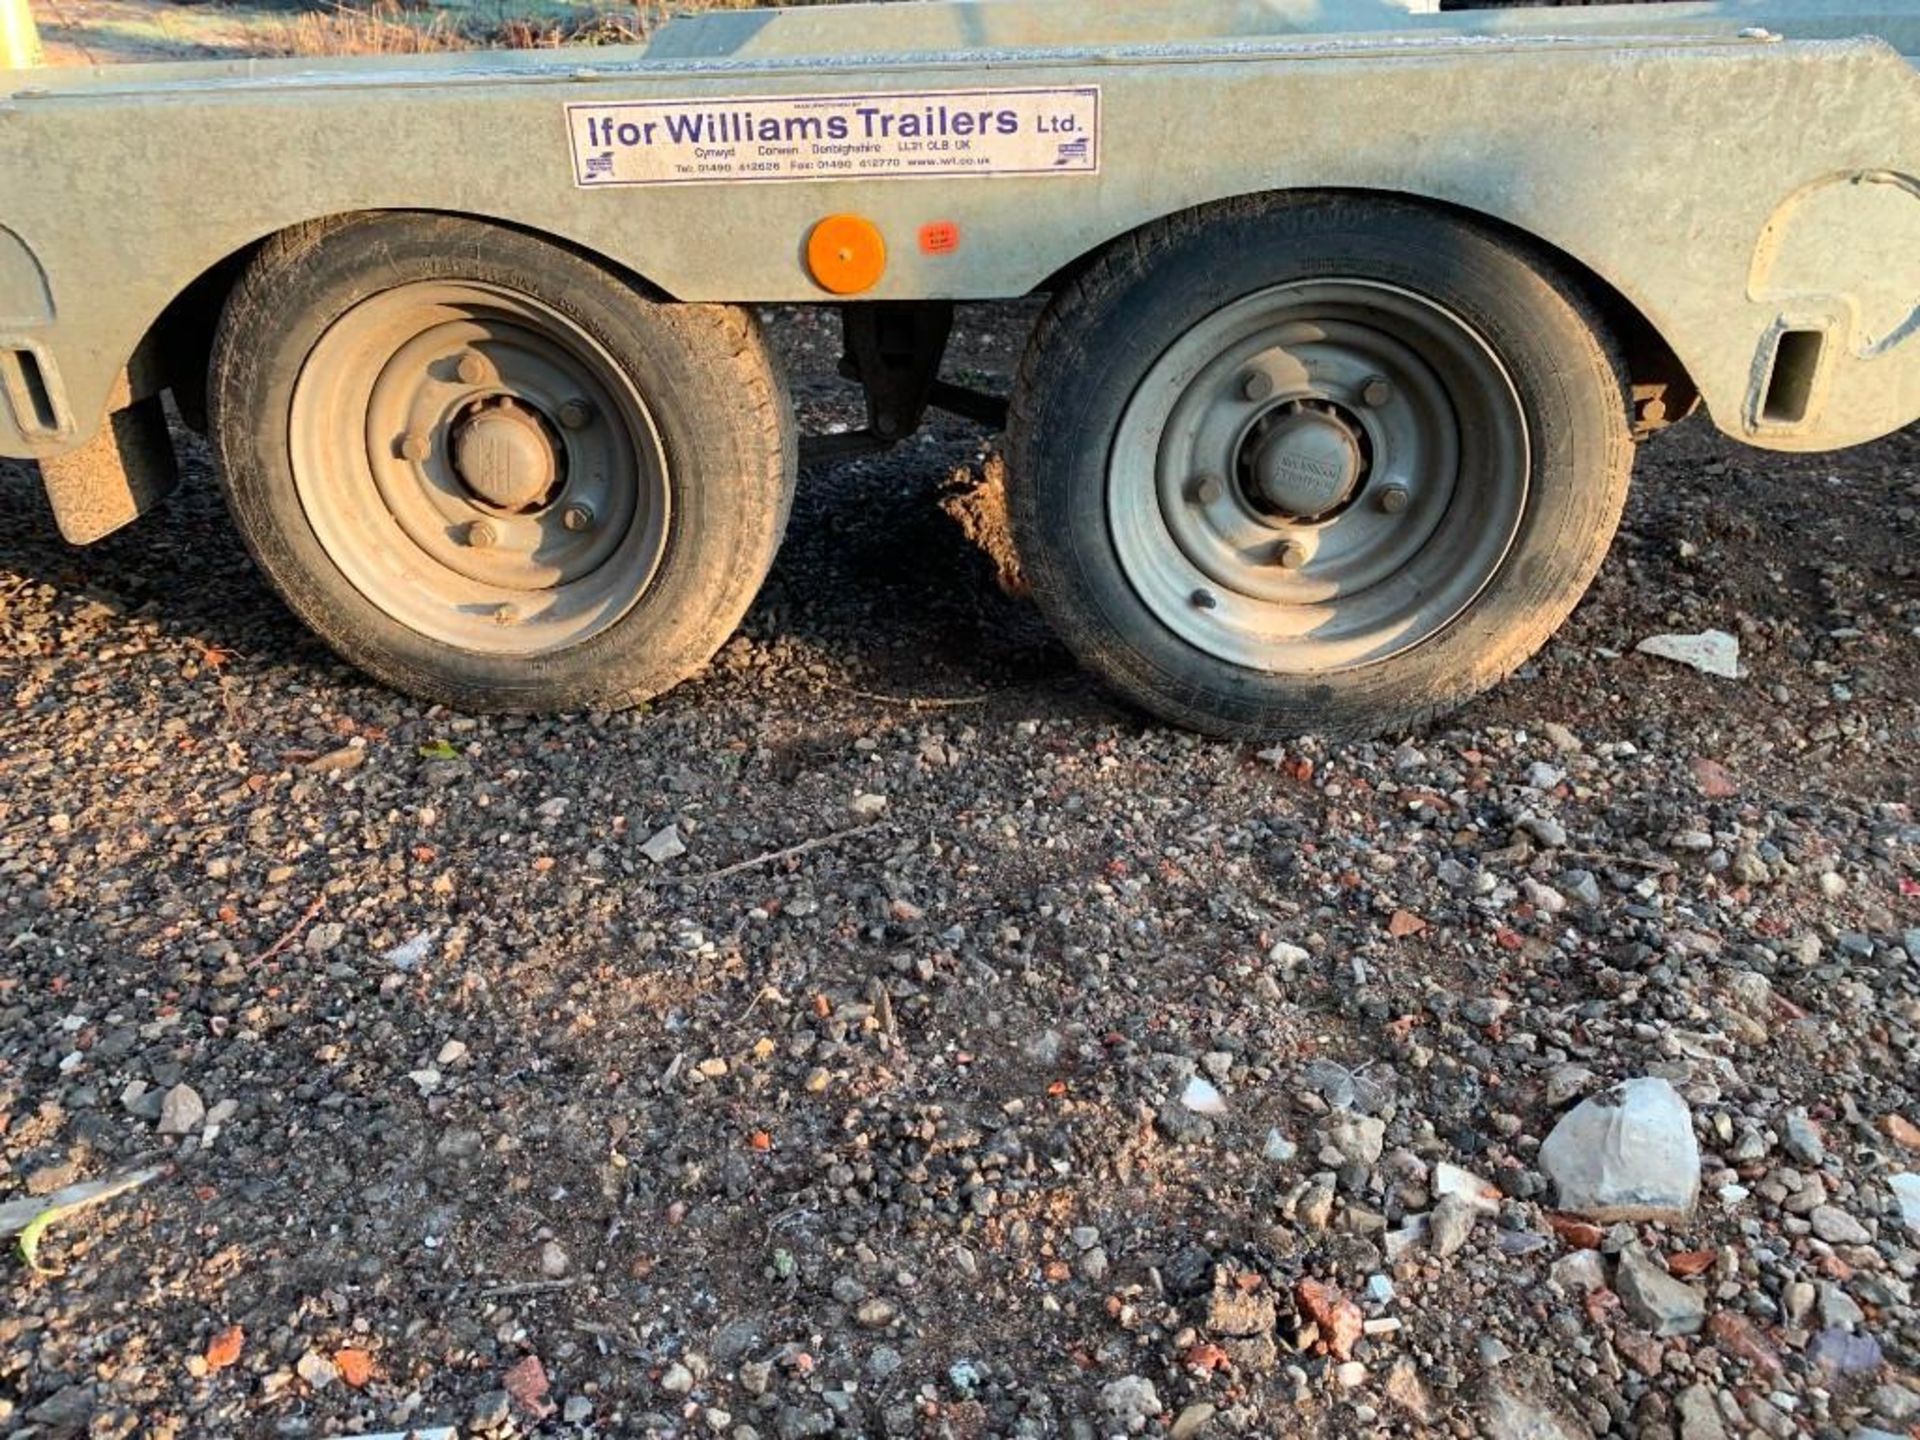 2019 Ifor Williams CT177G Car Trailer, Dual Axle, Ramps, Spare Wheel, Bed Tilt, Serial No: SCKD00000 - Image 8 of 10